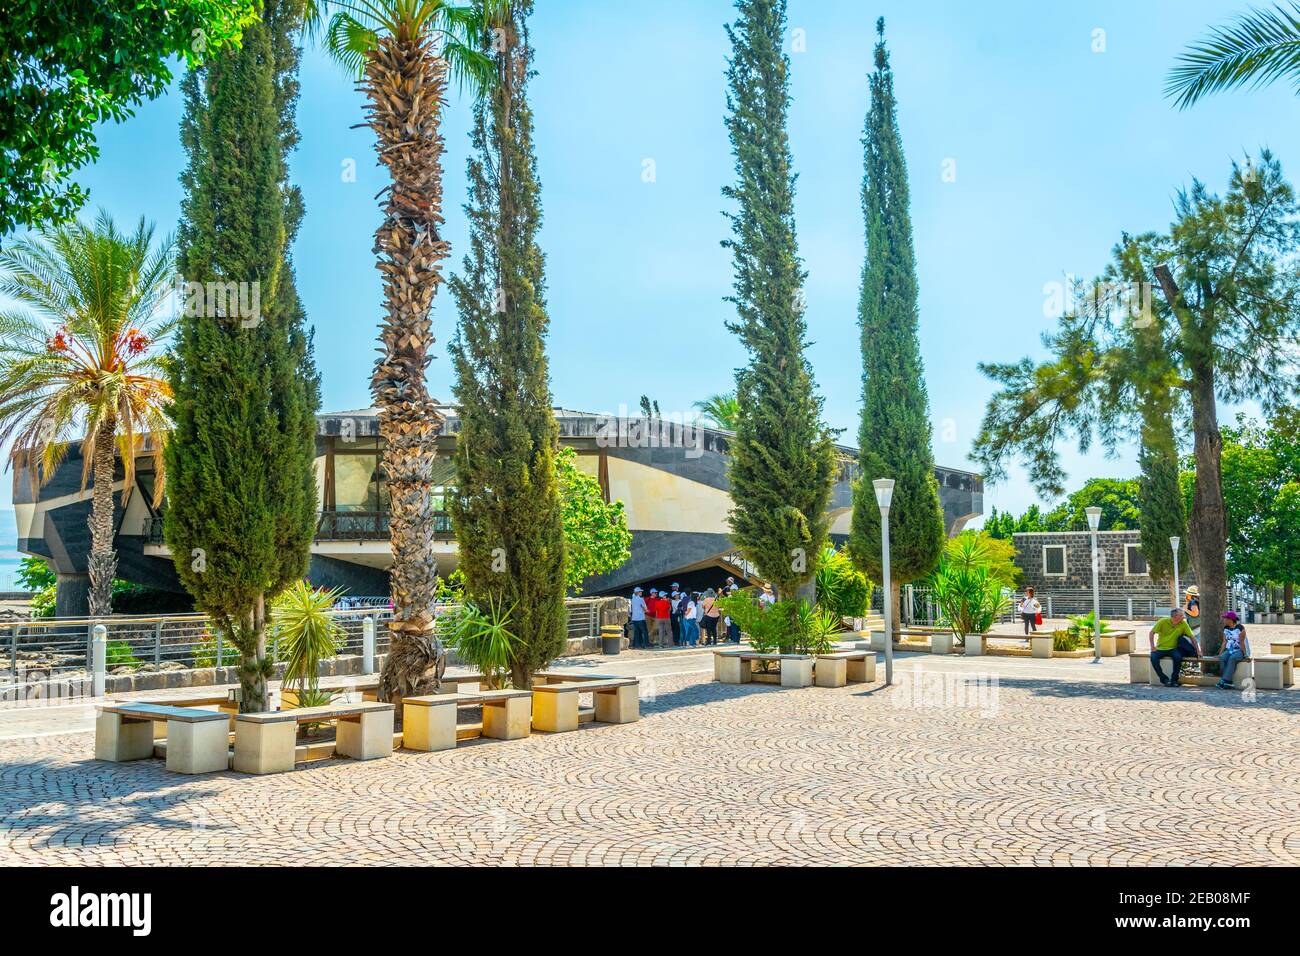 CAPERNAUM, ISRAEL, SEPTEMBER 15, 2018: View of a modern church inside of the Capernaum complex in Israel Stock Photo